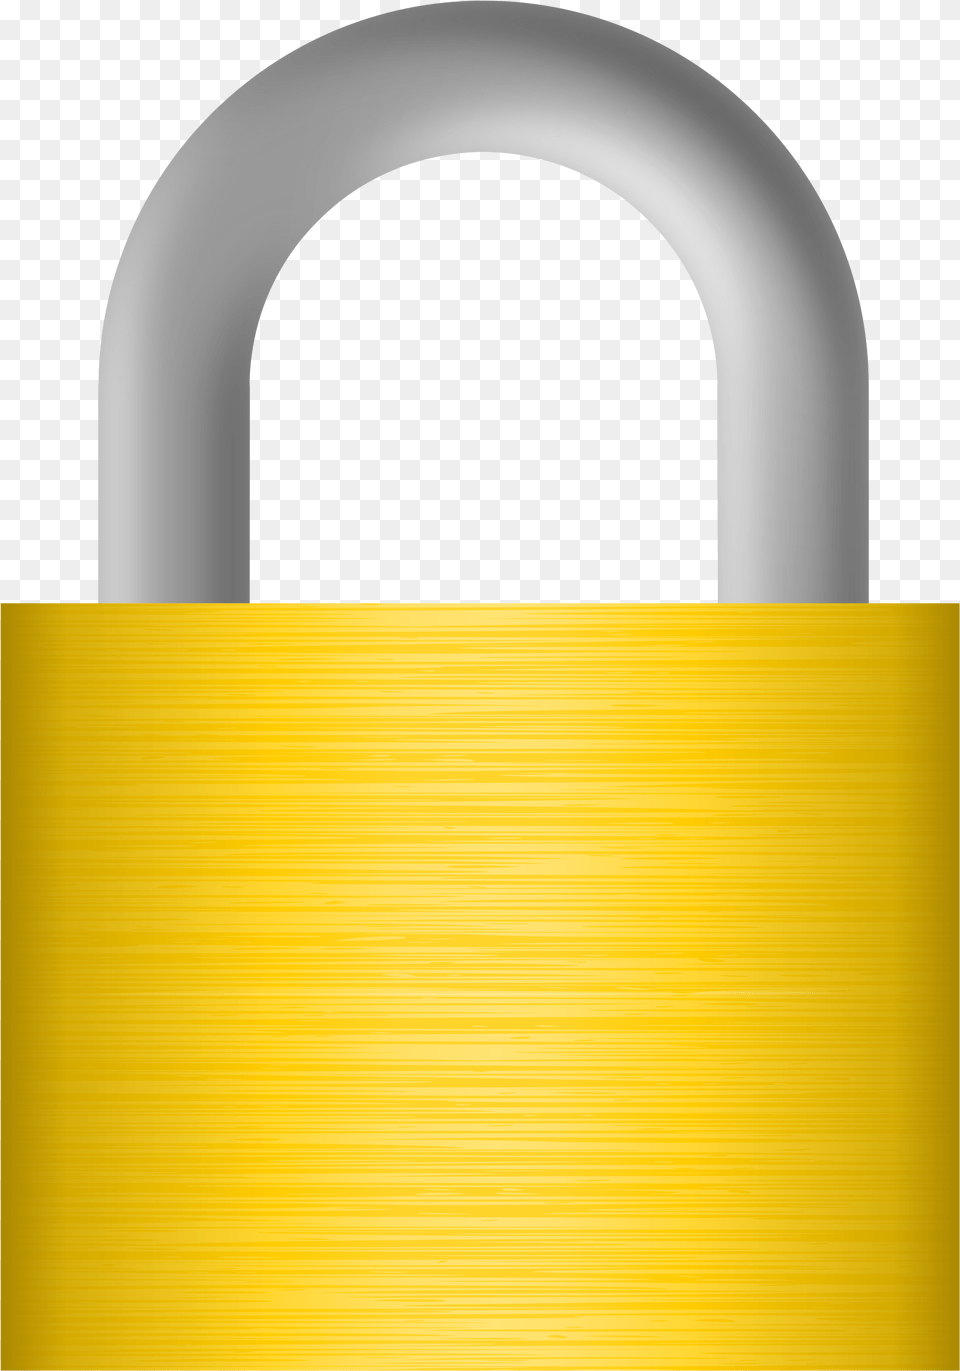 Lock Clipart Vector Clip Art Online Royalty Lock Clipart Free Png